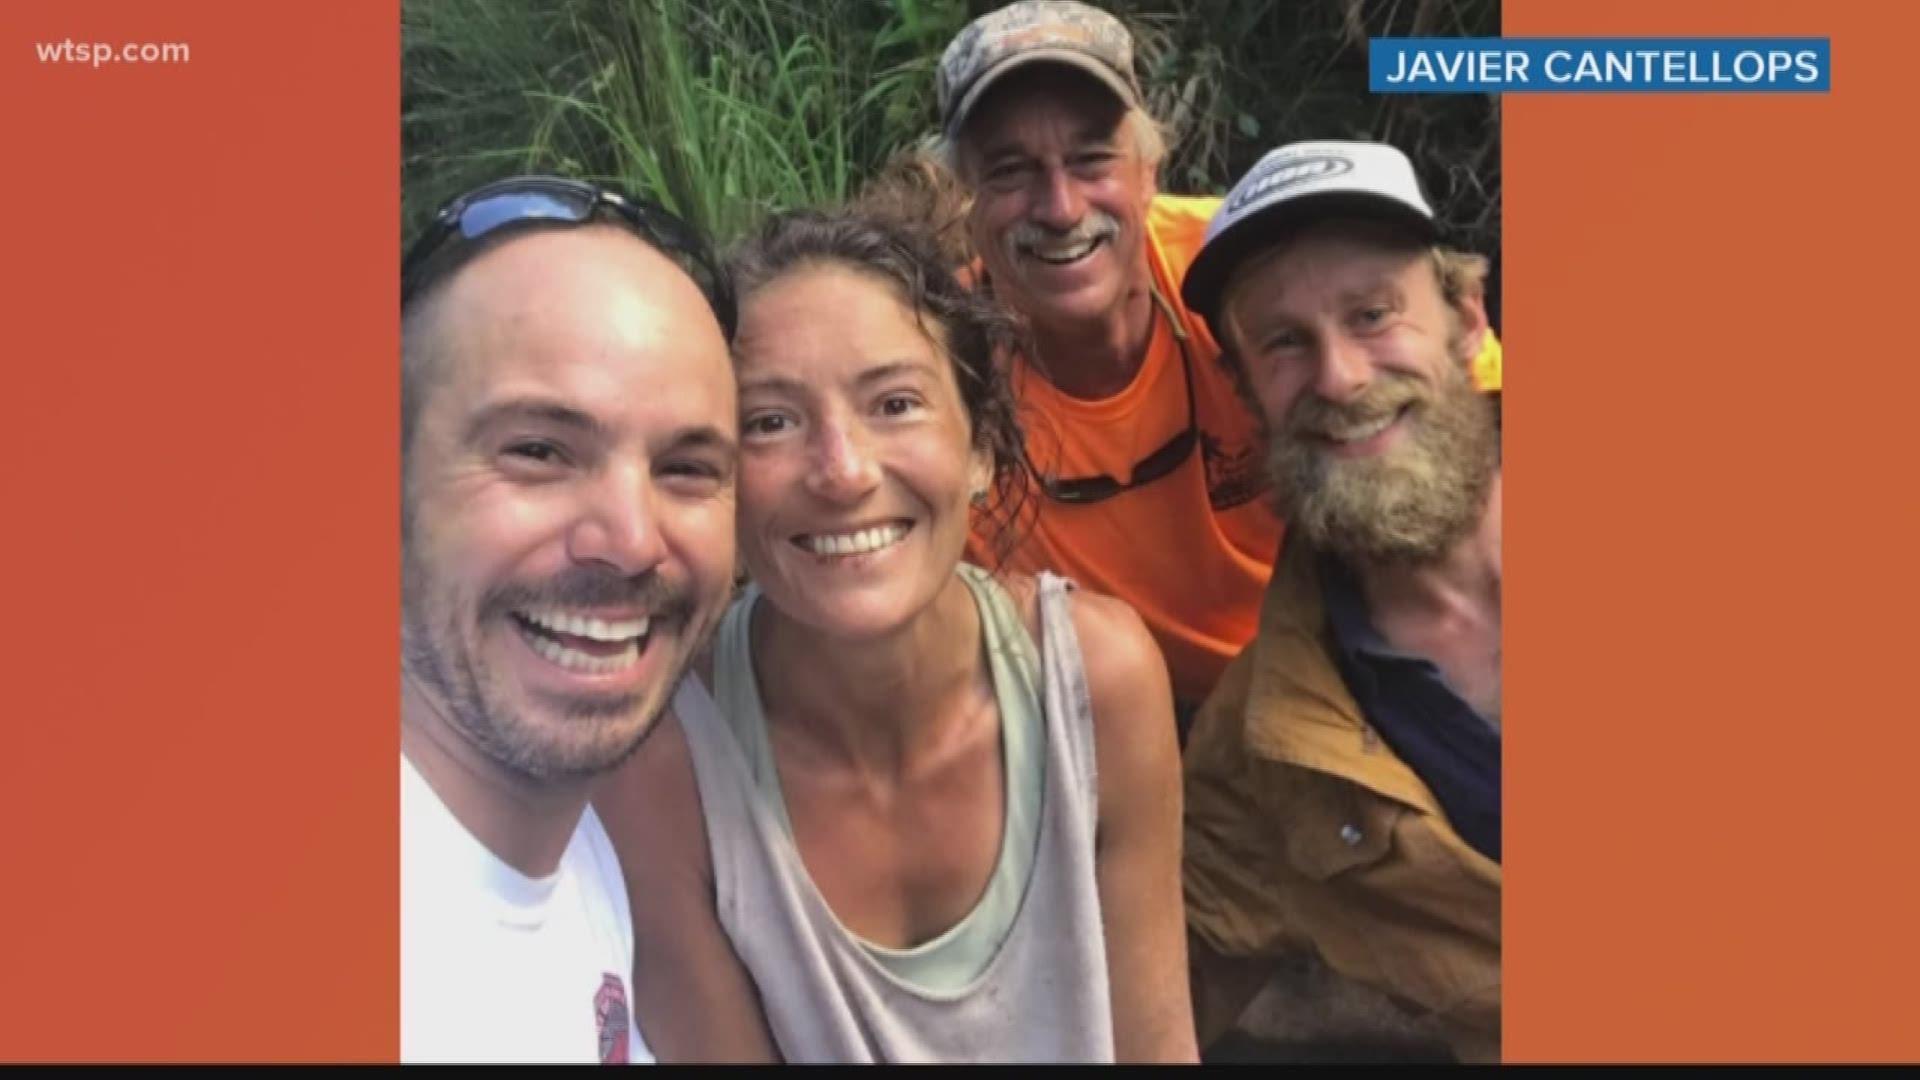 The missing hiker has been found alive on Maui after more than two weeks, reports CBS Honolulu affiliate KGMB-TV.

Amanda Eller, 35, was spotted by a helicopter, according to a Facebook page run by the woman's family and friends. They said she was in a creek bed between two waterfalls. 

She was being flown by helicopter for medical treatment.